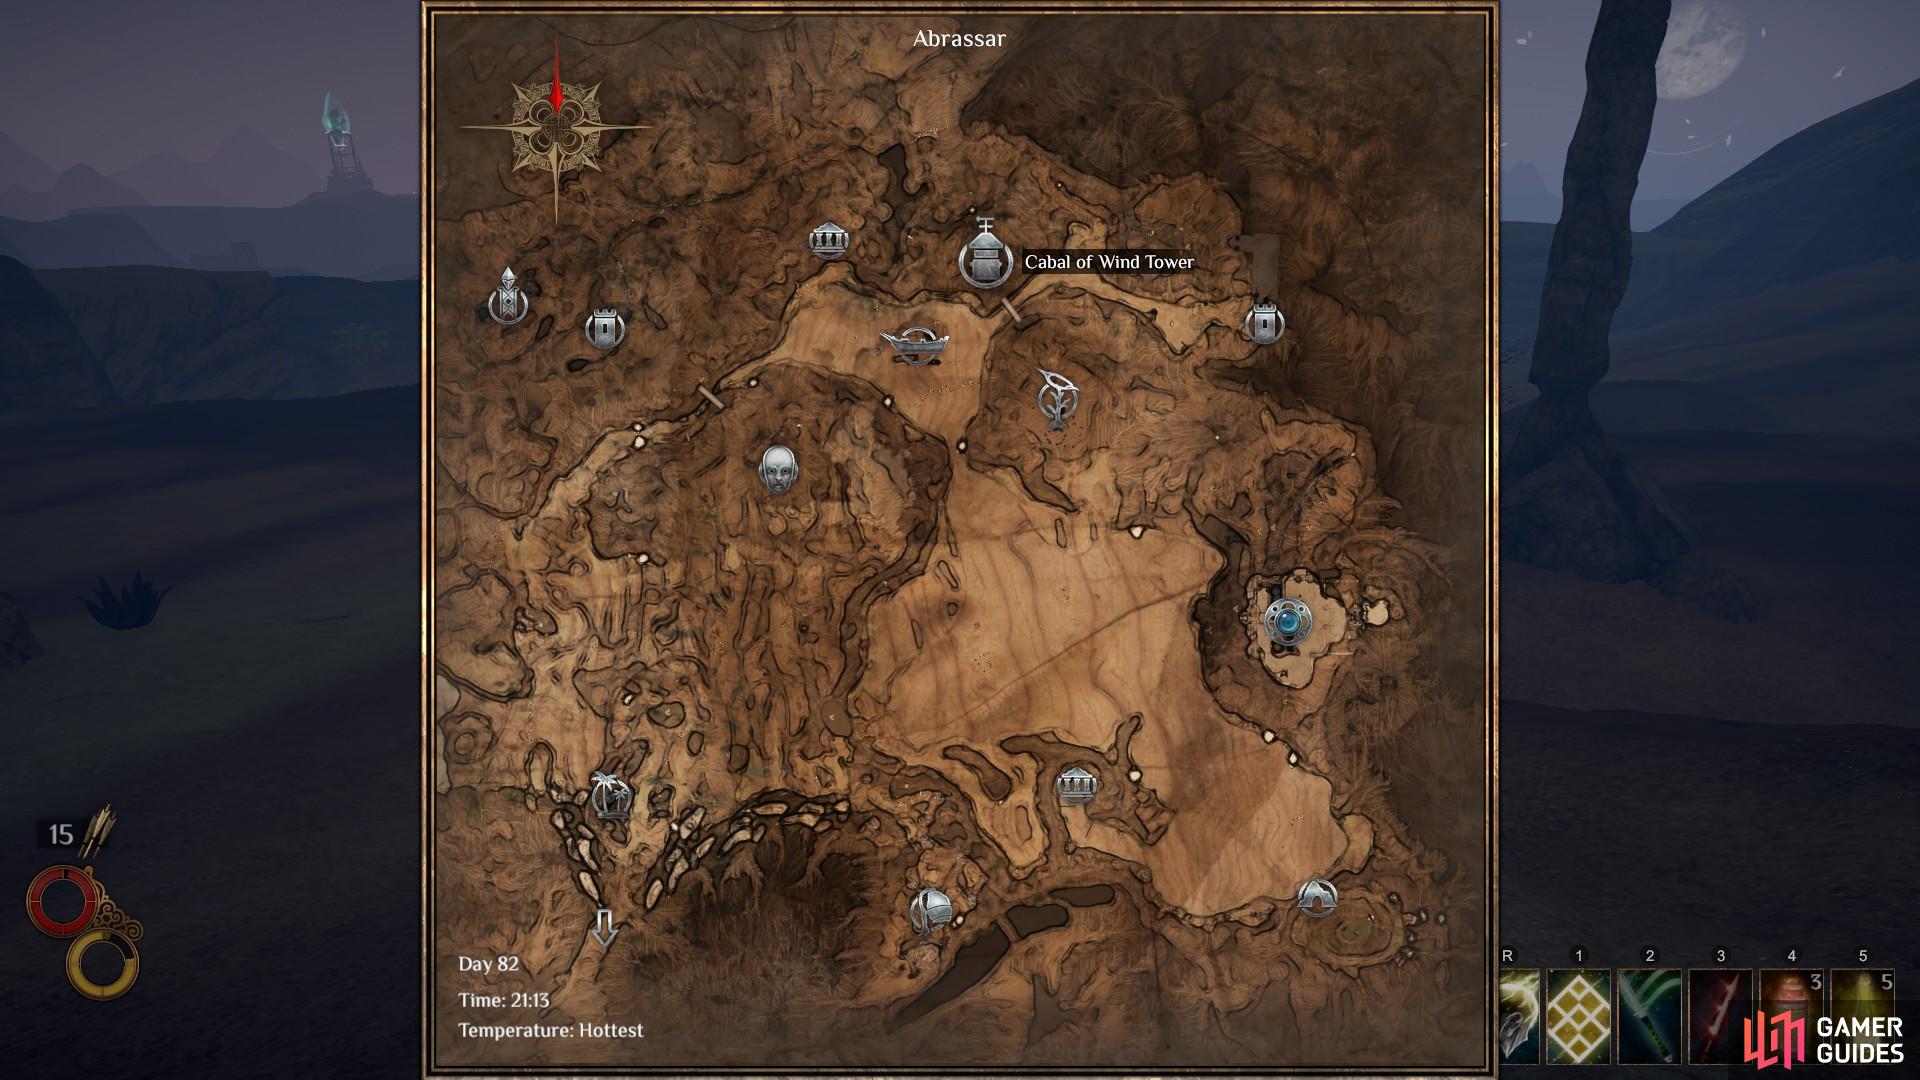 The location of the Cabal of Wind Tower in Abrassar, north west of Levant.